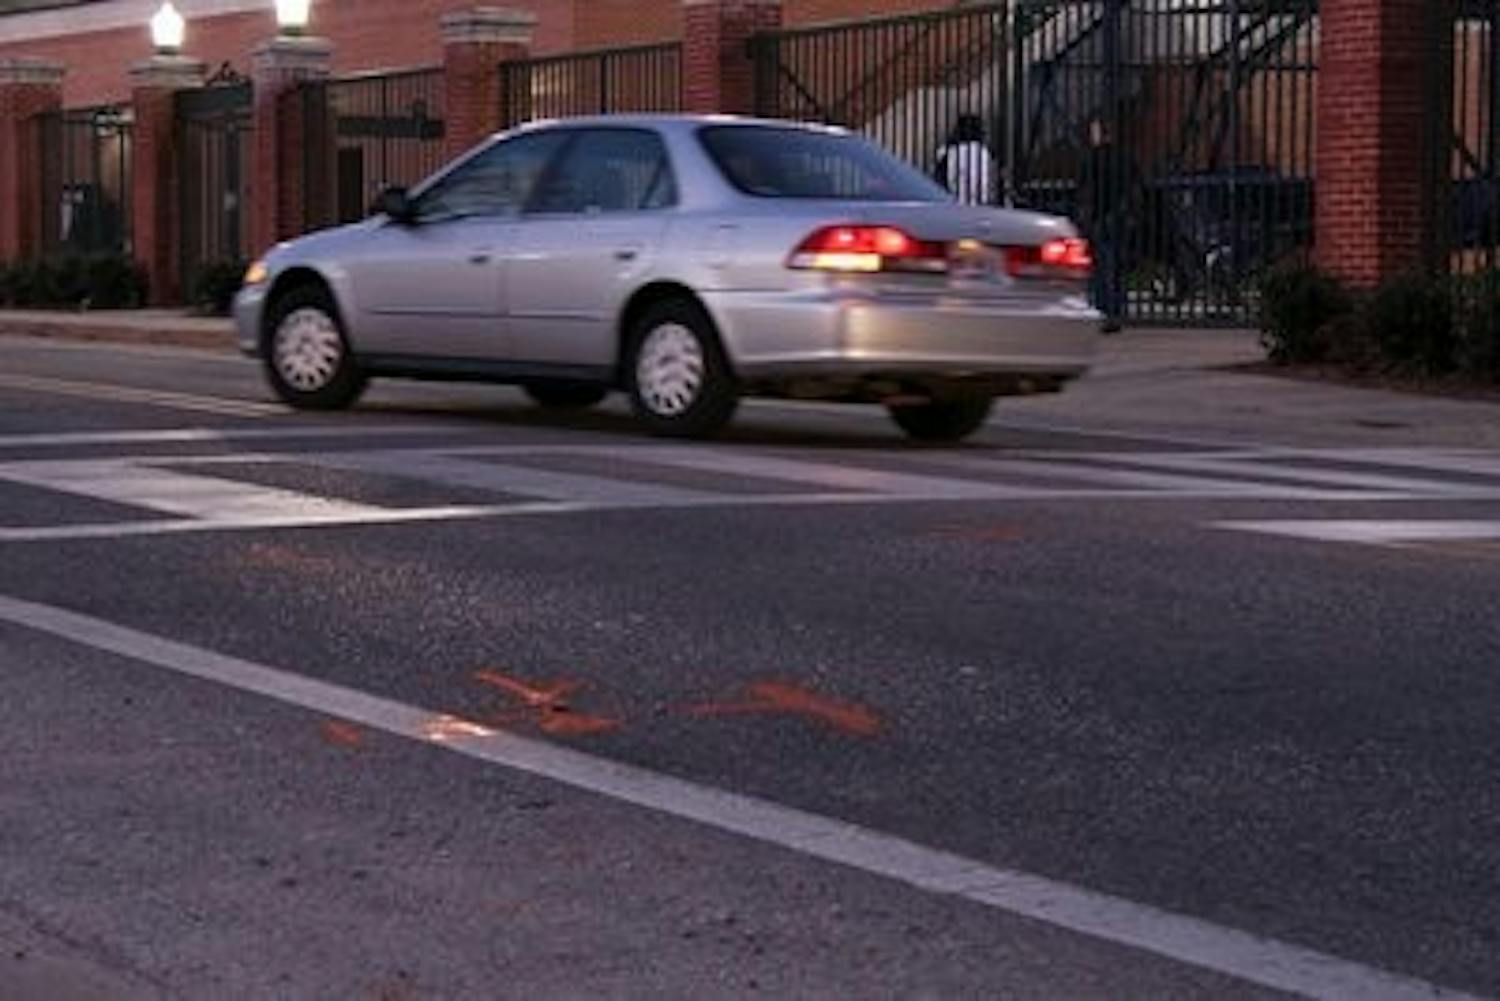 The orange lines signify where the car was stopped after it hit the pedestrian. Blakeley Sisk / PHOTO EDITOR